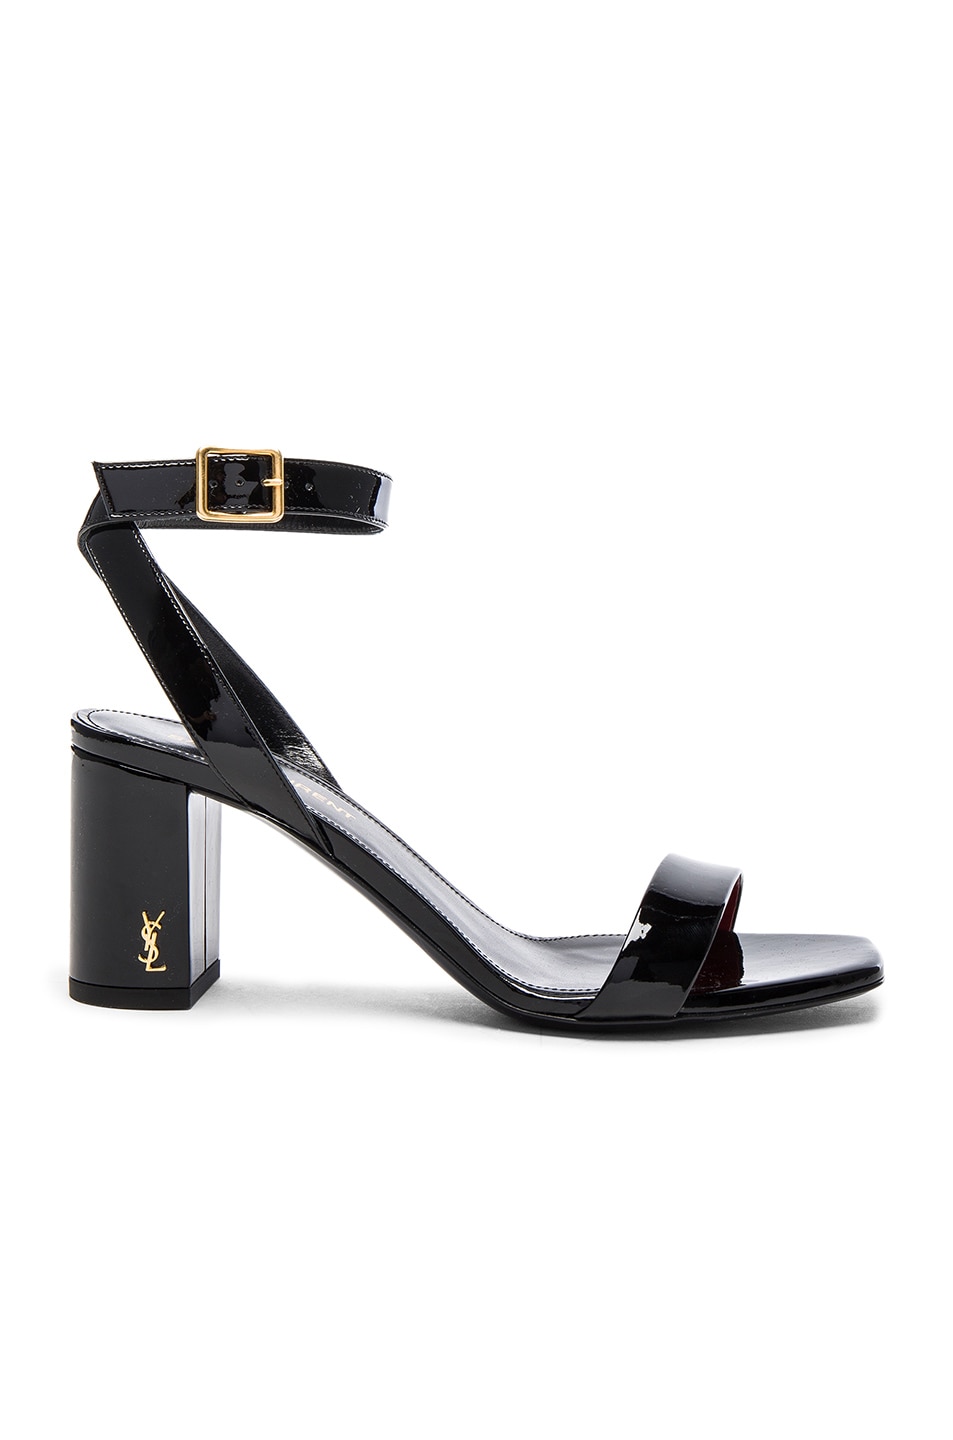 Image 1 of Saint Laurent Loulou Patent Leather Sandals in Black